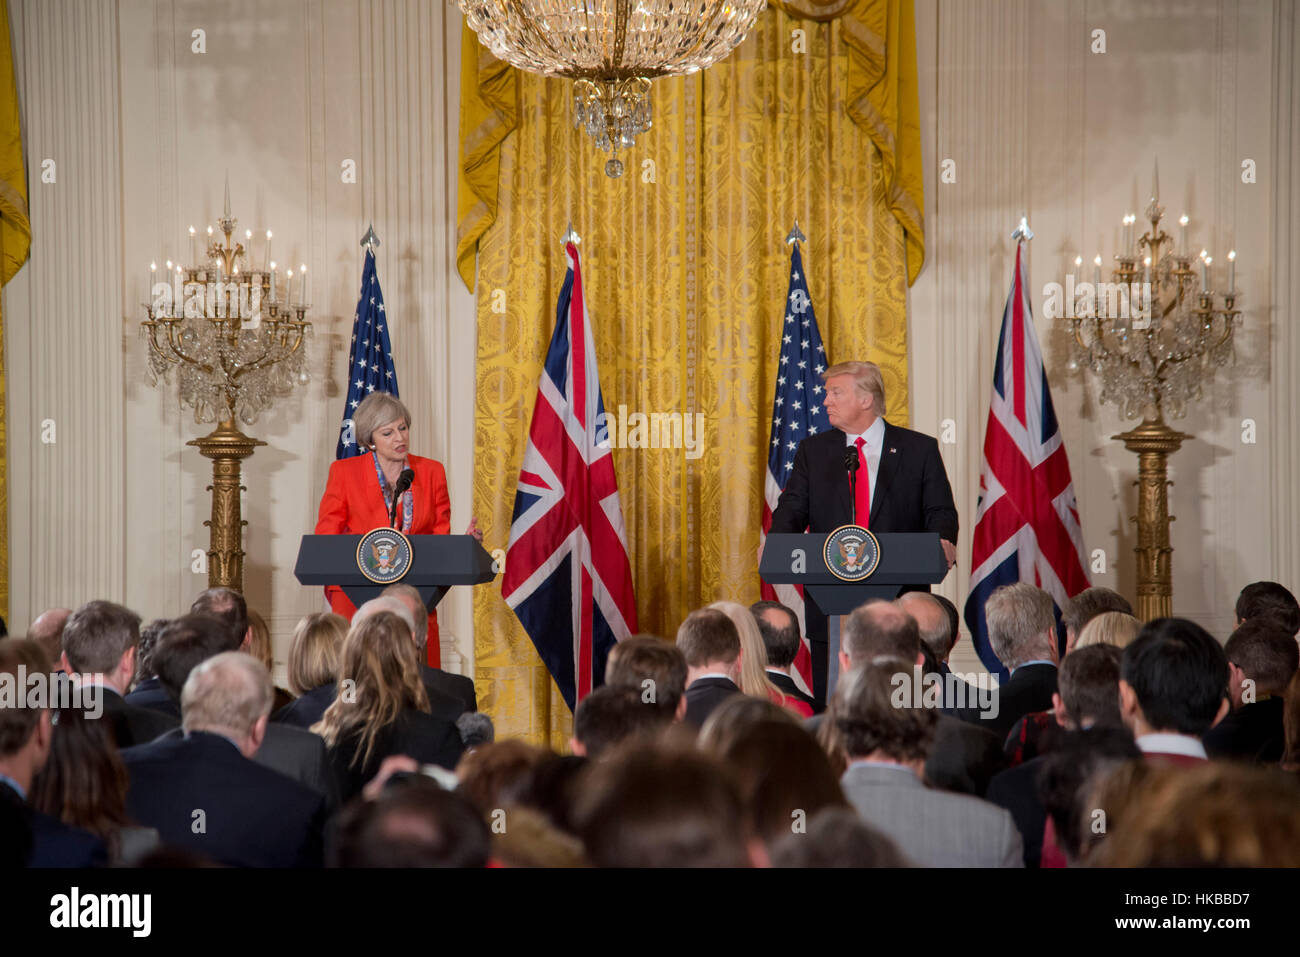 Washington, DC, January 27, 2017, President Donald J. Trump, welcomes Prime Minister of the United Kingdom, Theresa May to the White House. This is May's first official visit to the White House as the UK's Prime Minister. Patsy Lynch/MediaPunch Stock Photo